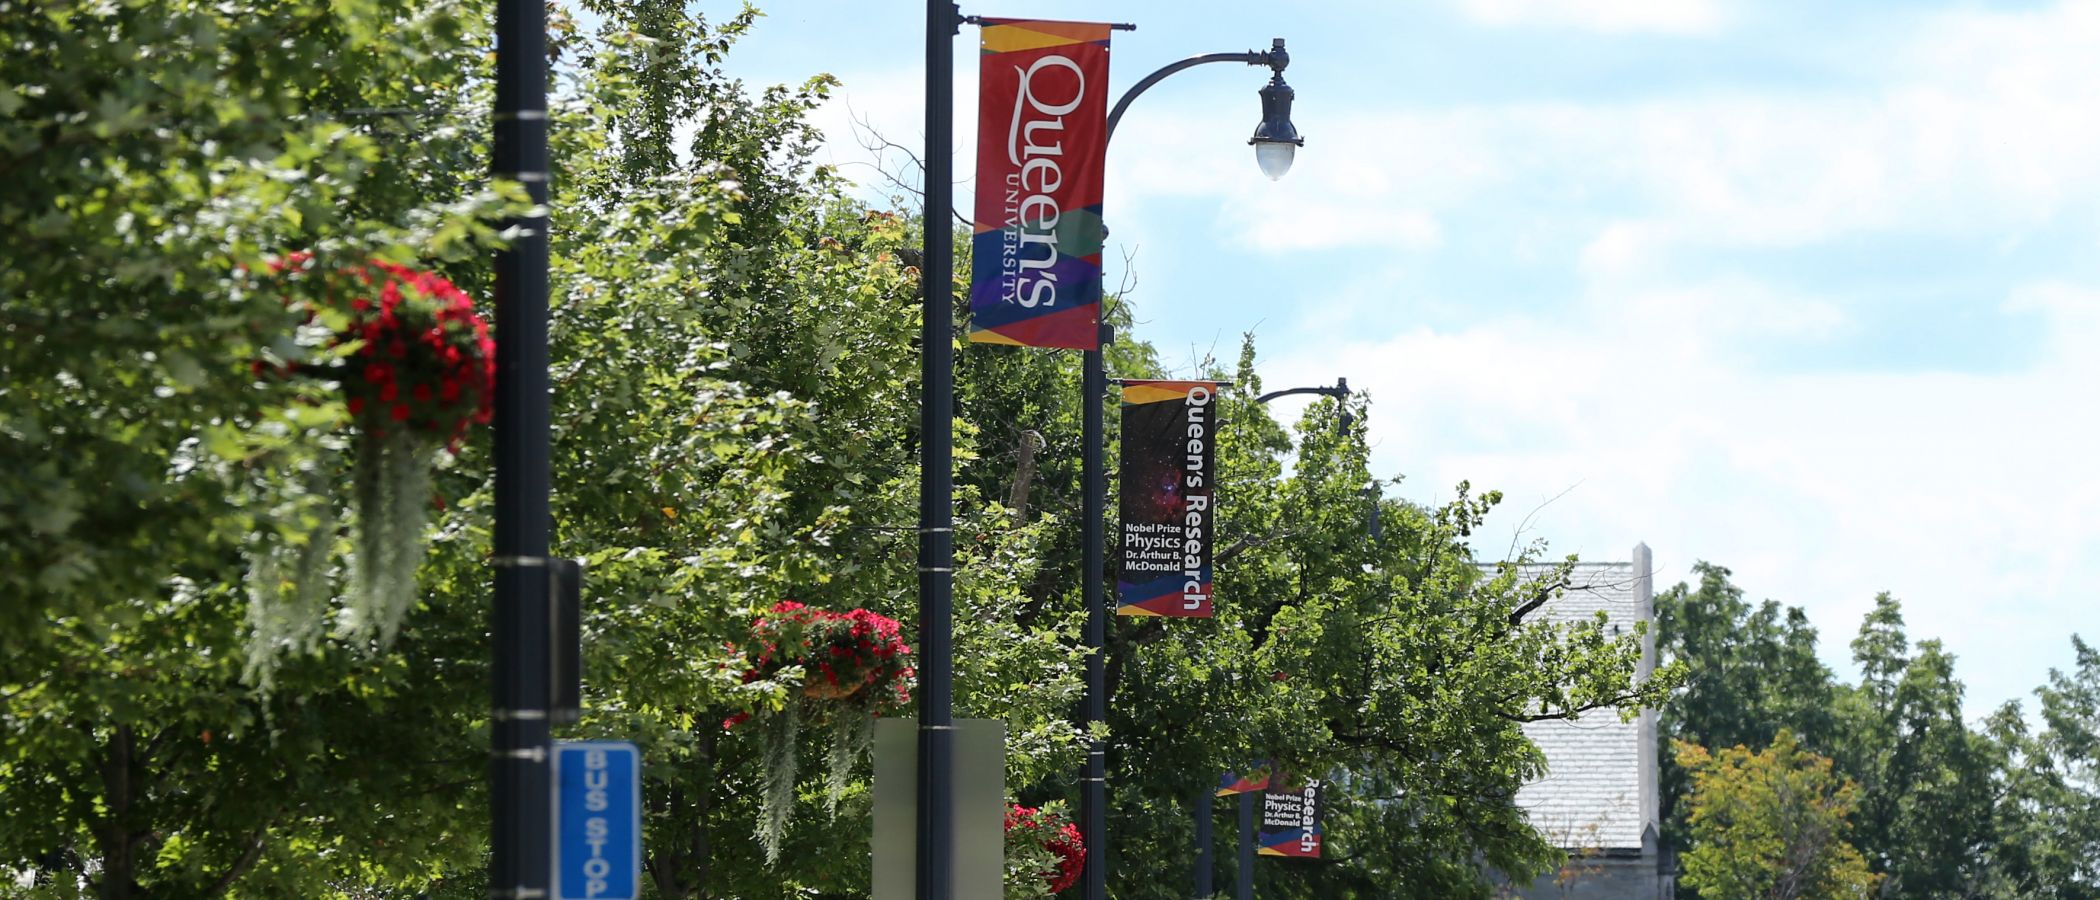 Image of Queen's Campus in the summer with vertical banners attached to lamp posts that read "Queen's research"